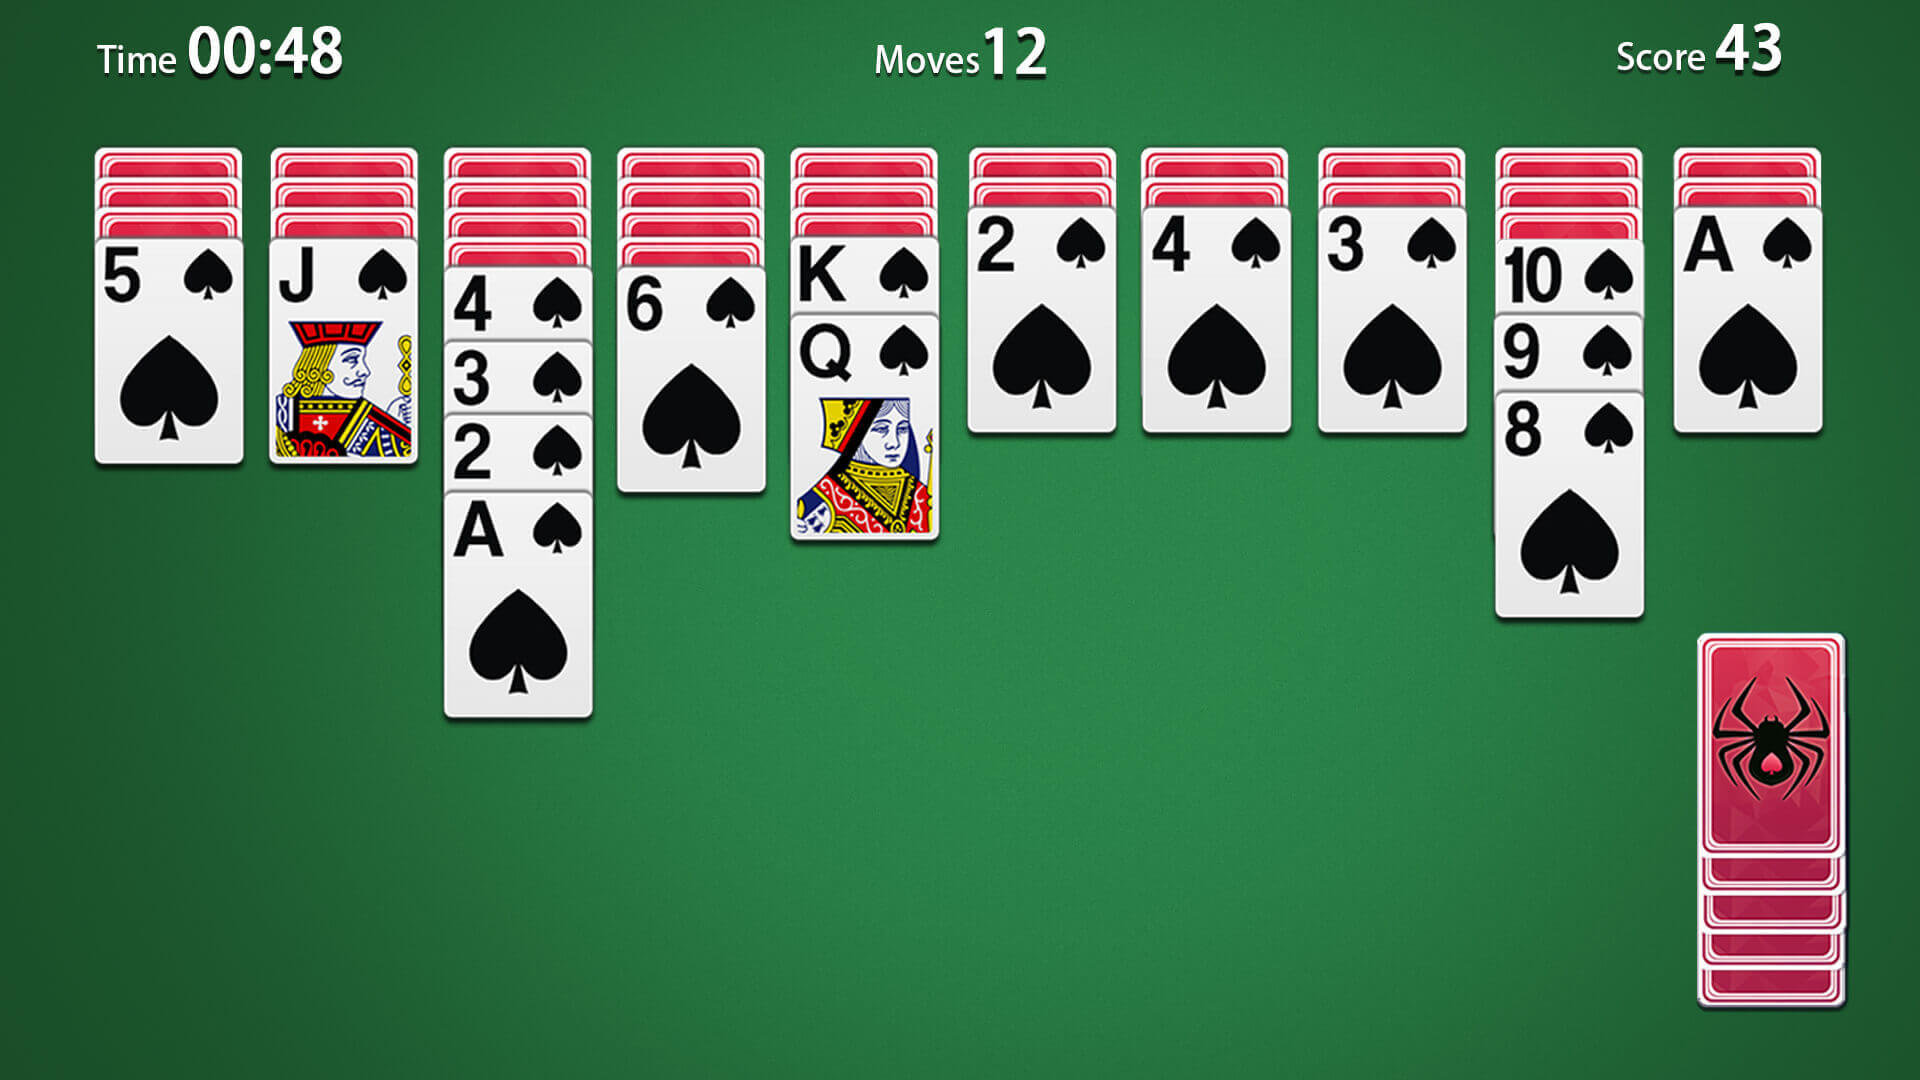 Screenshot 1 of Spider Solitaire - Card Games 5.0.0.20220608